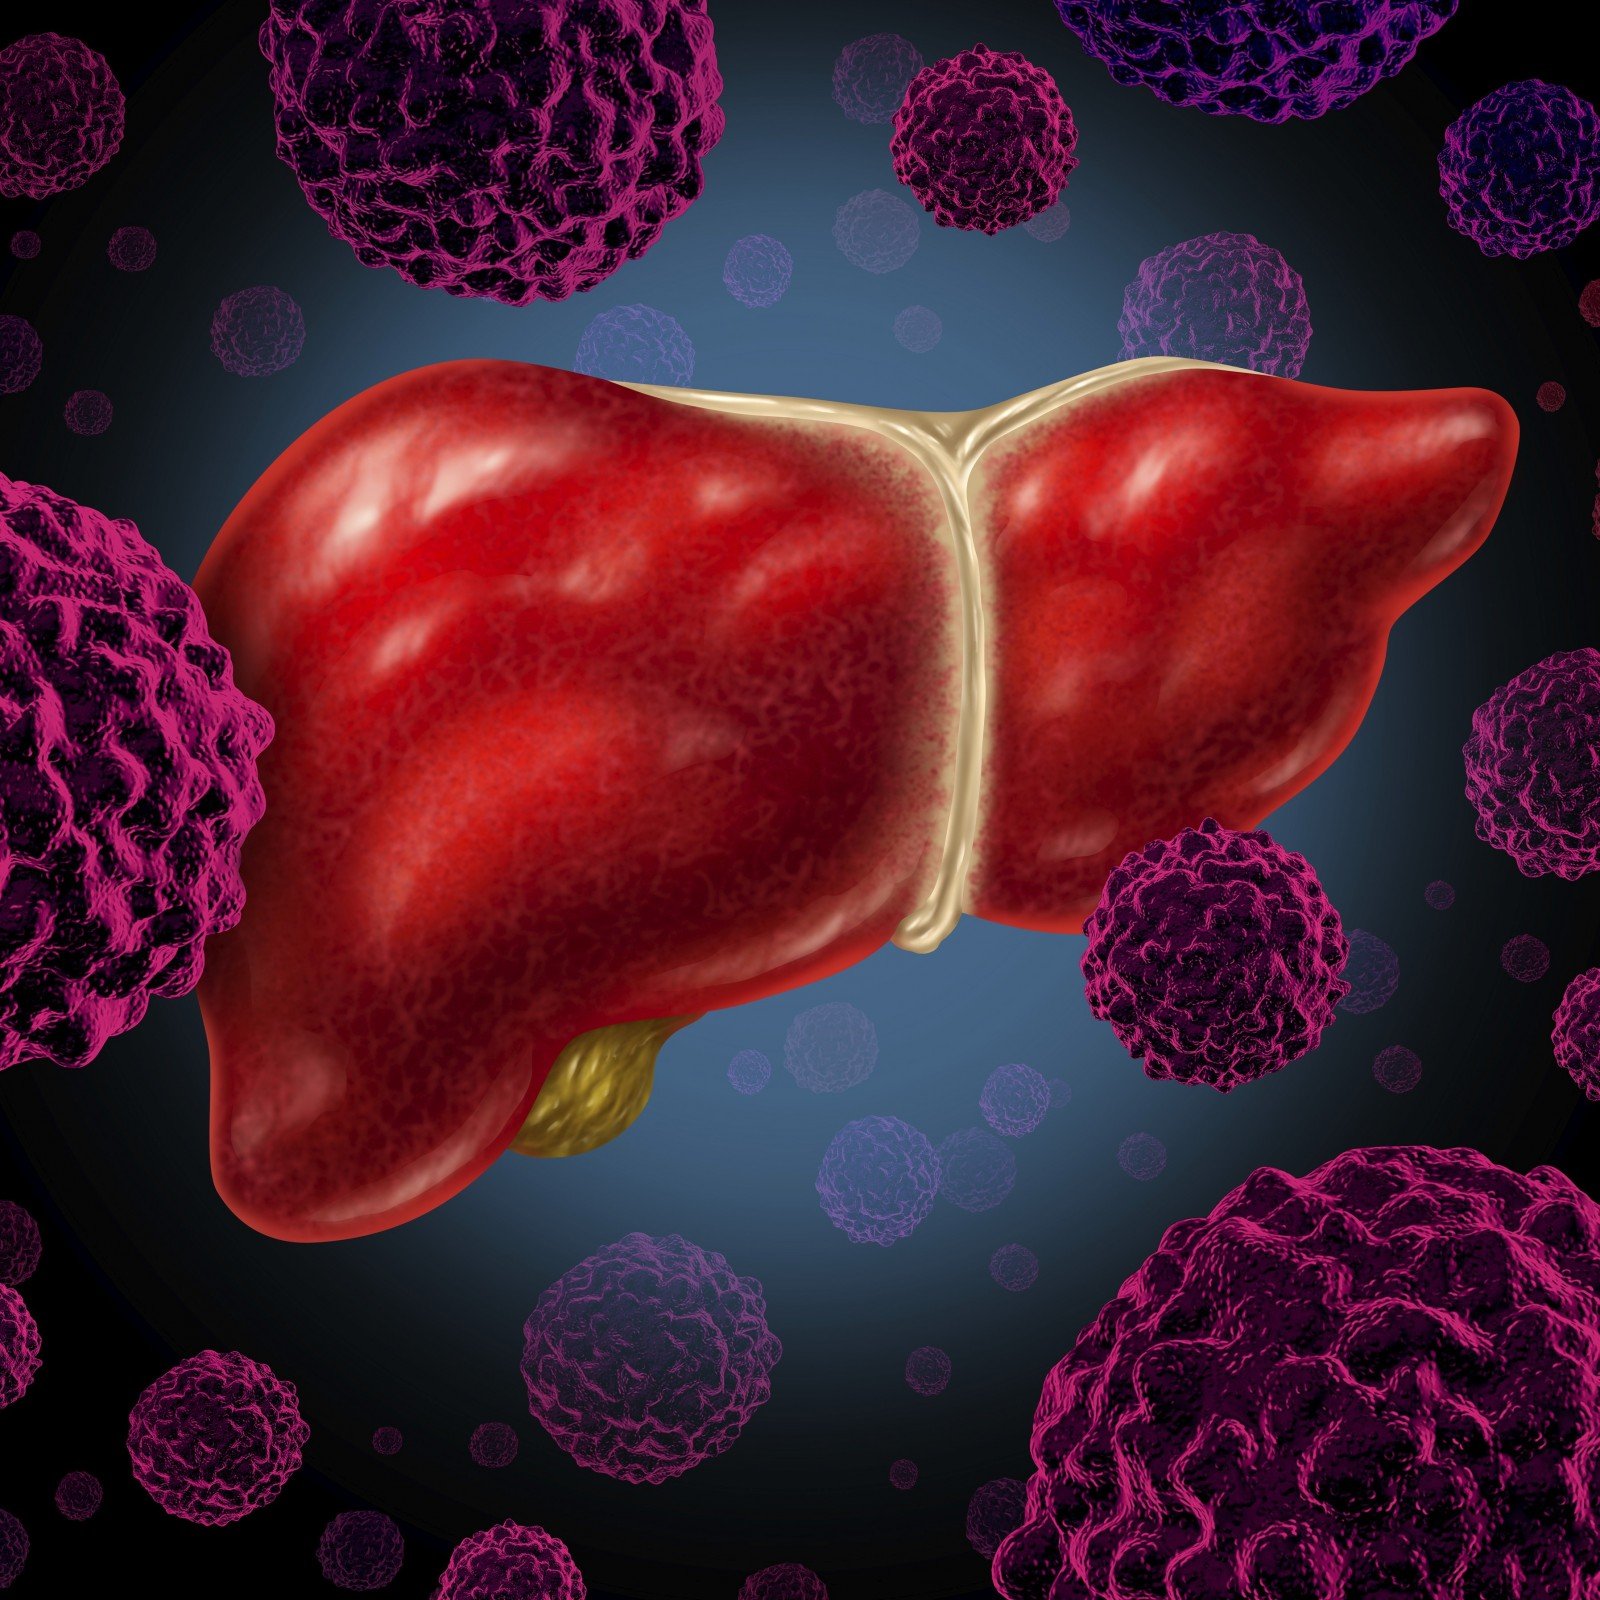 Liver Cancer and Hepatitis B